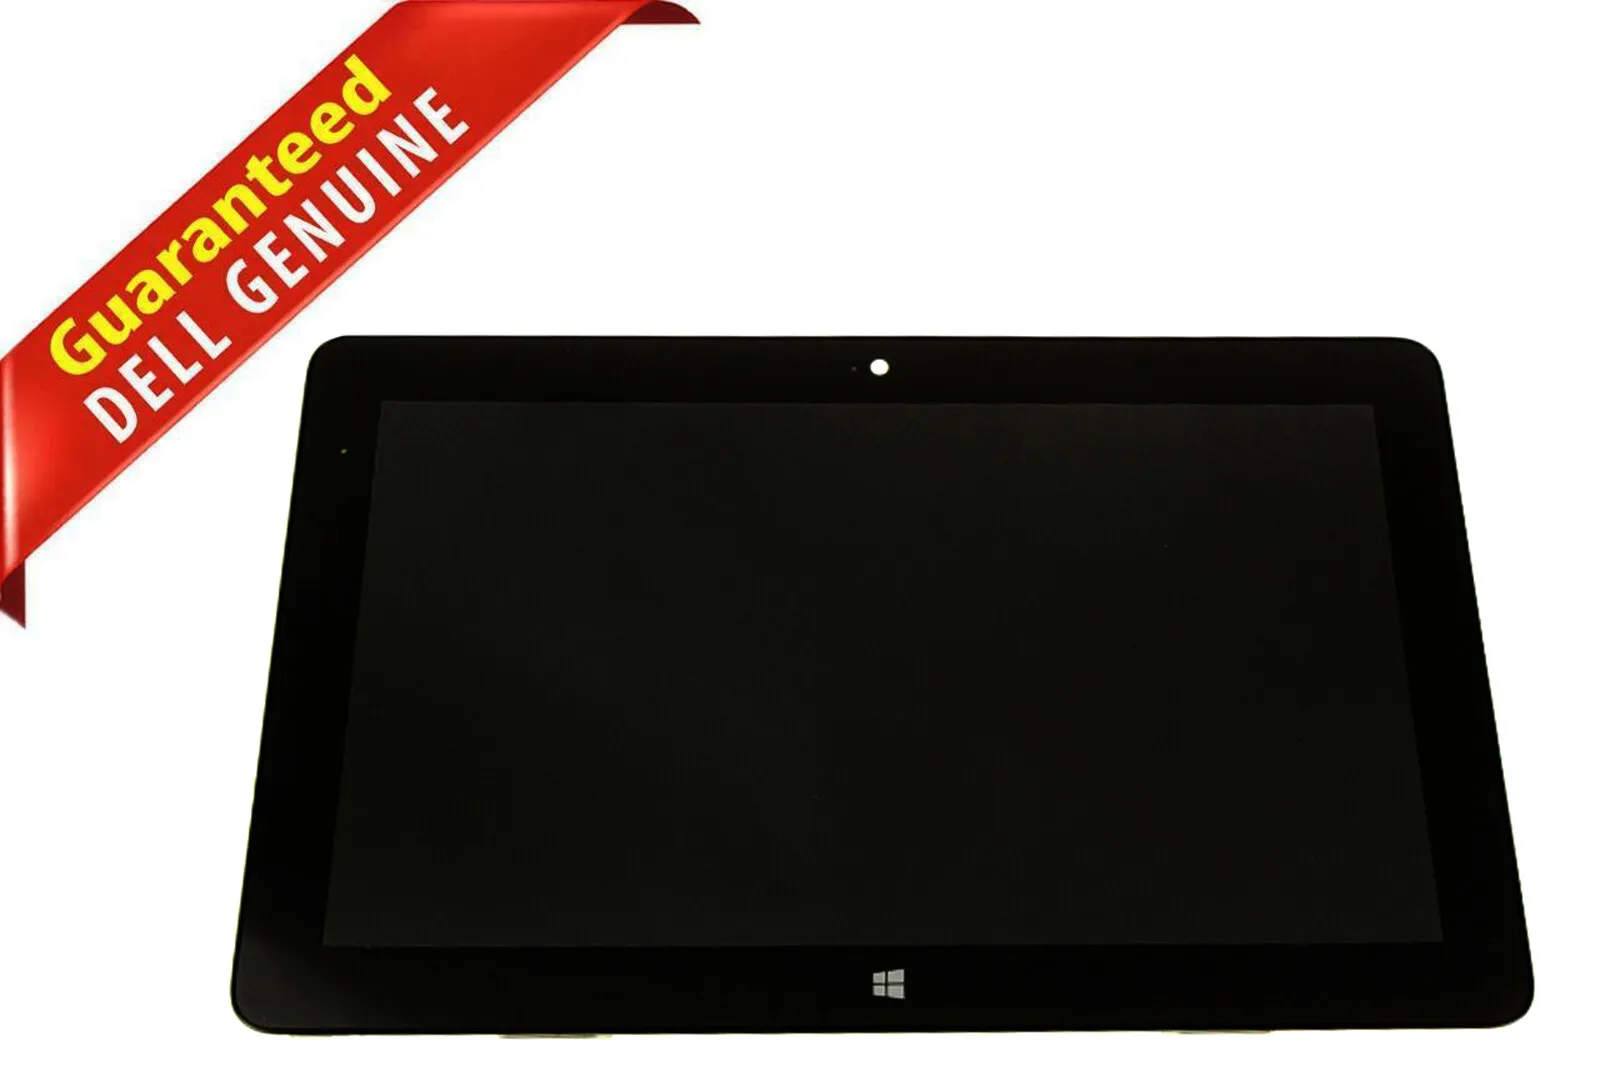 Lot 10 V4TTN OEM Dell Venue 11 Pro 5130 Tablet 10.8" Touchscreen LED LCD Screen(New) - image 5 of 5